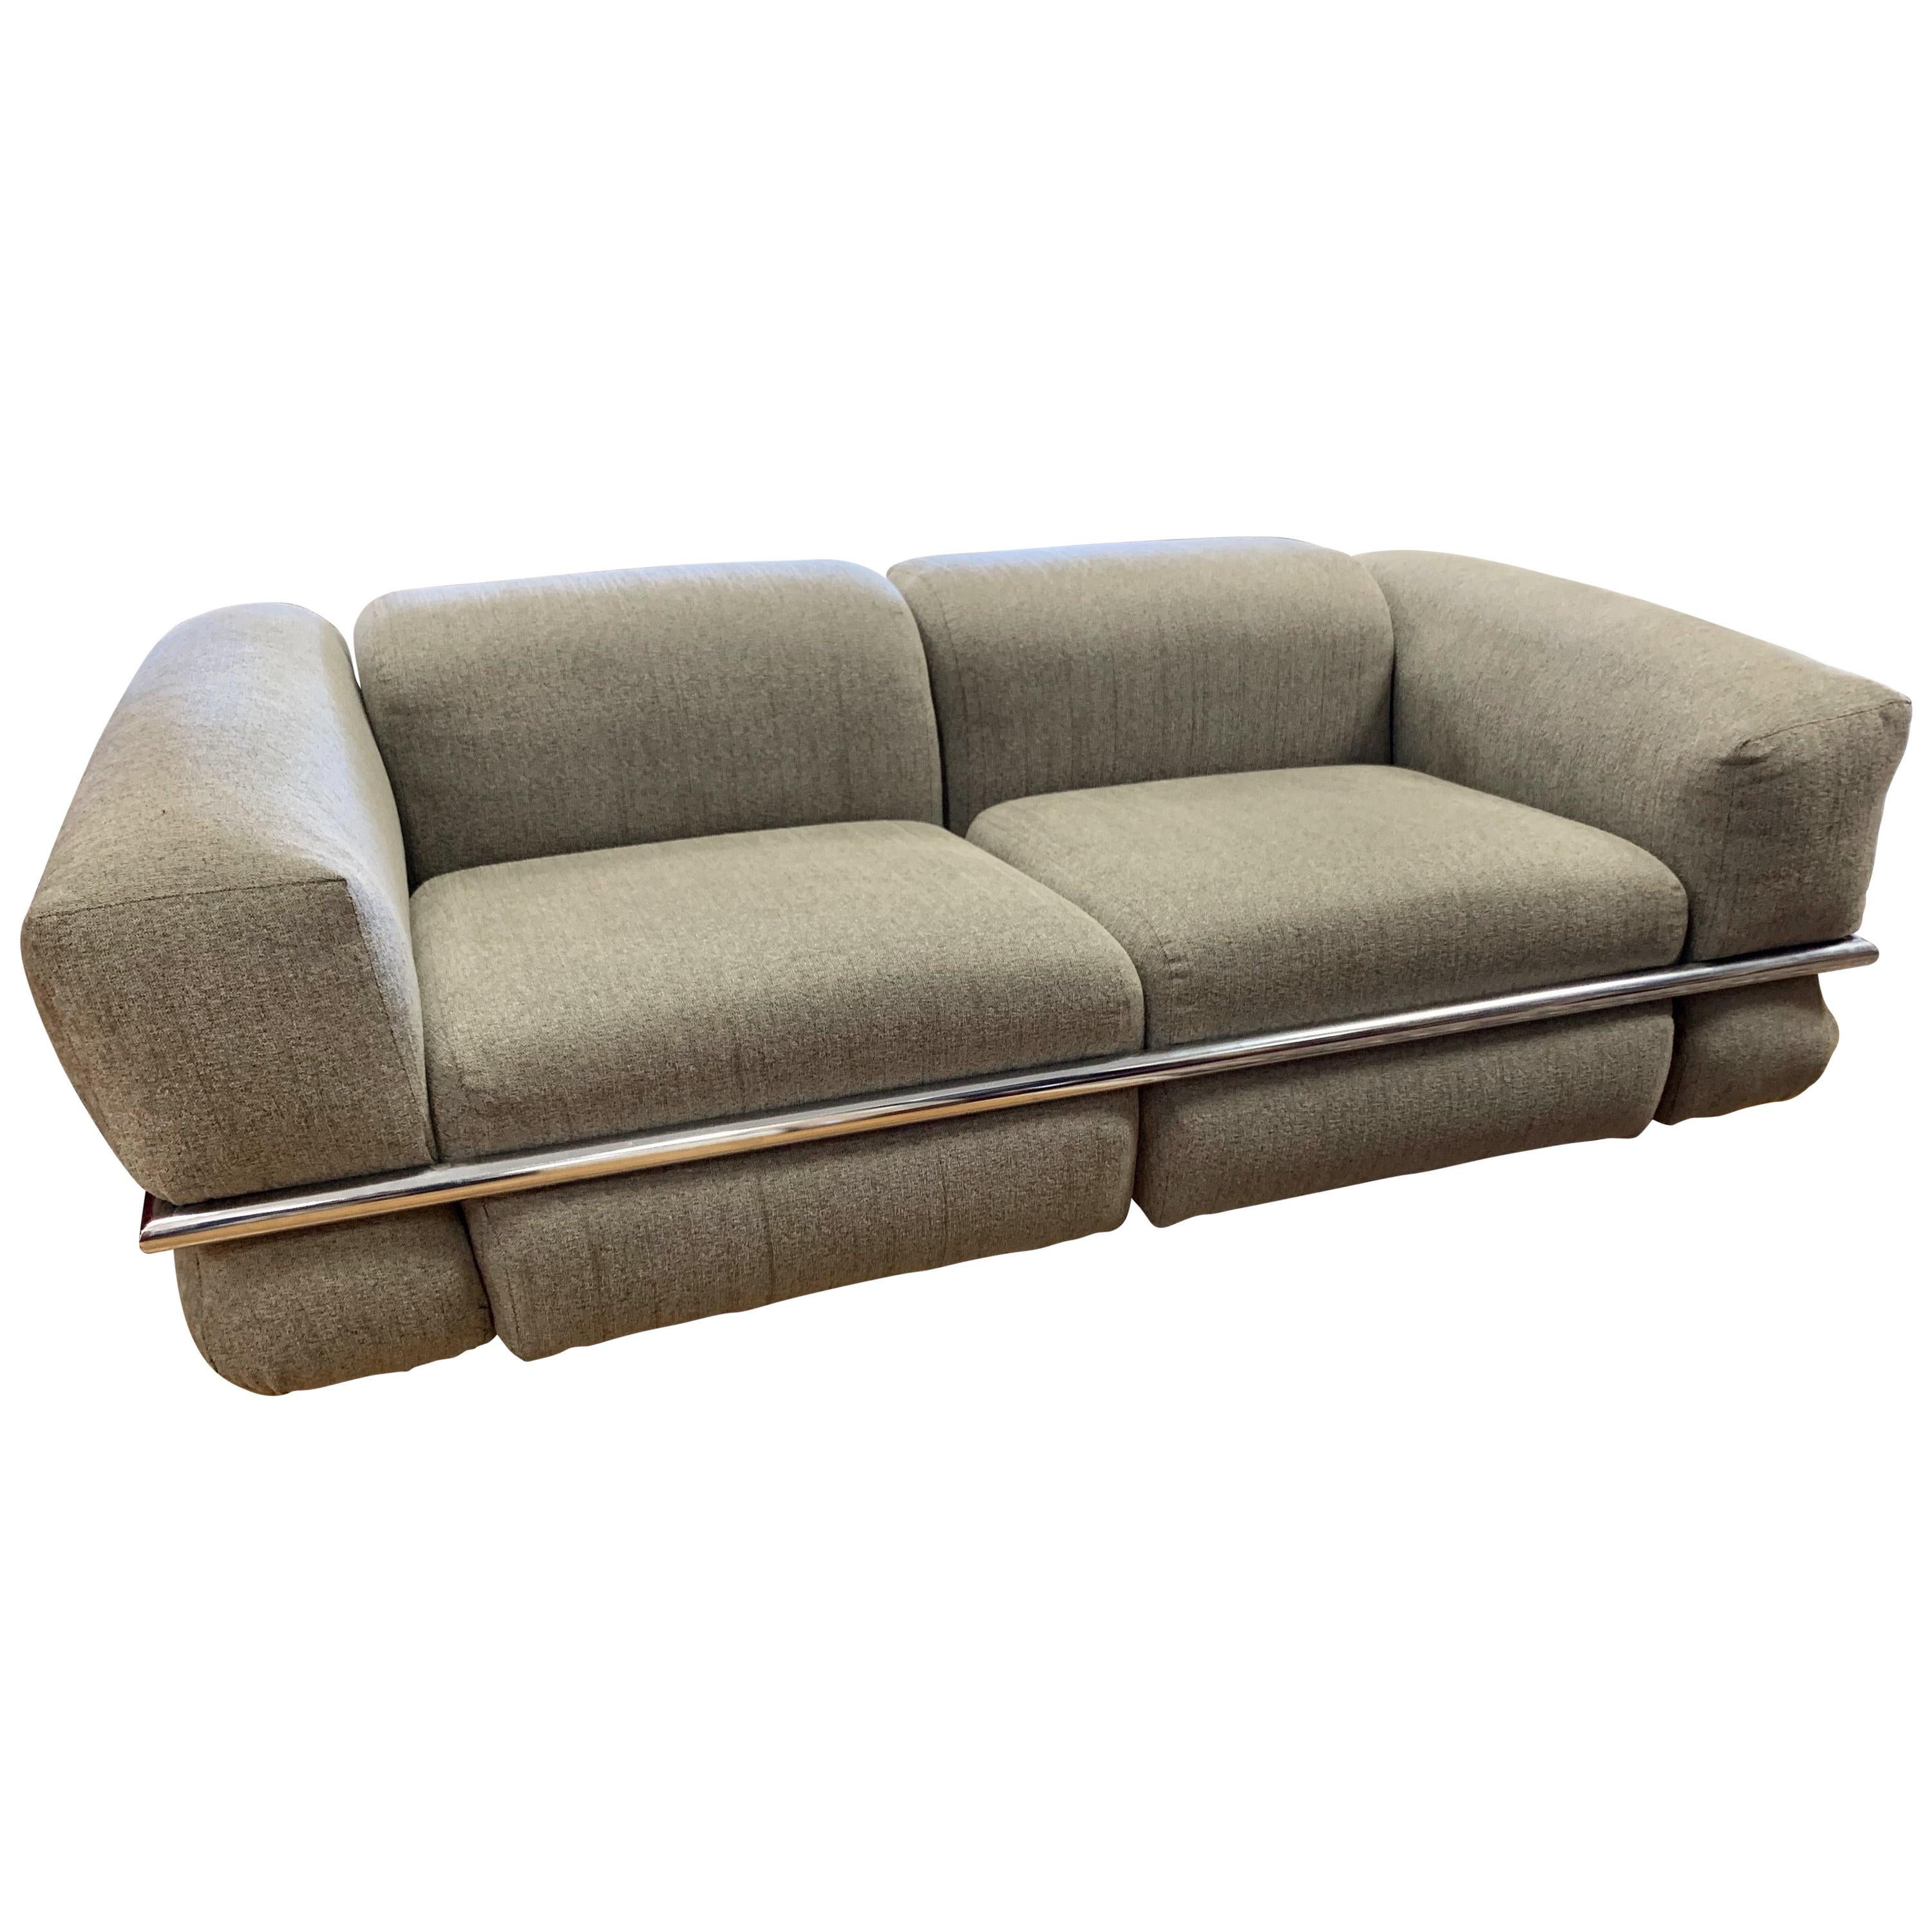 Stunning Cassina Sesann sofa by Gianfranco Frattini, the second of two we have. Designed in 1969 in Italy. The fabric is a solid gray and its signature is the chrome plated steel that runs around the sofa. All original, circa 1970's and still in